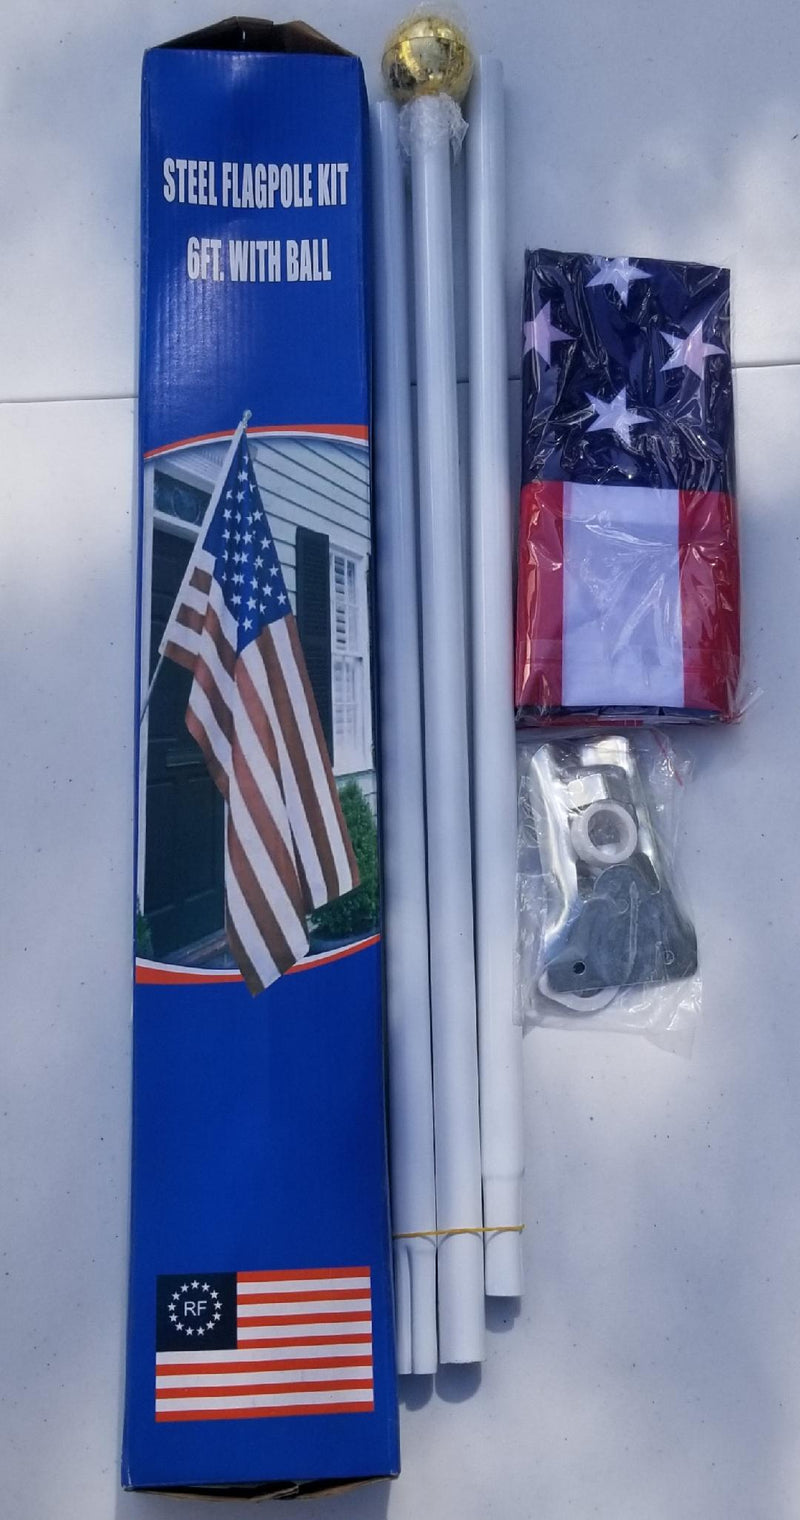 Gift Boxed U.S.A. 6' Foot USA 3'x5' American Flag Steel FlagPole Kit Sets With Gold Ball Decoration Non-Furl Sale